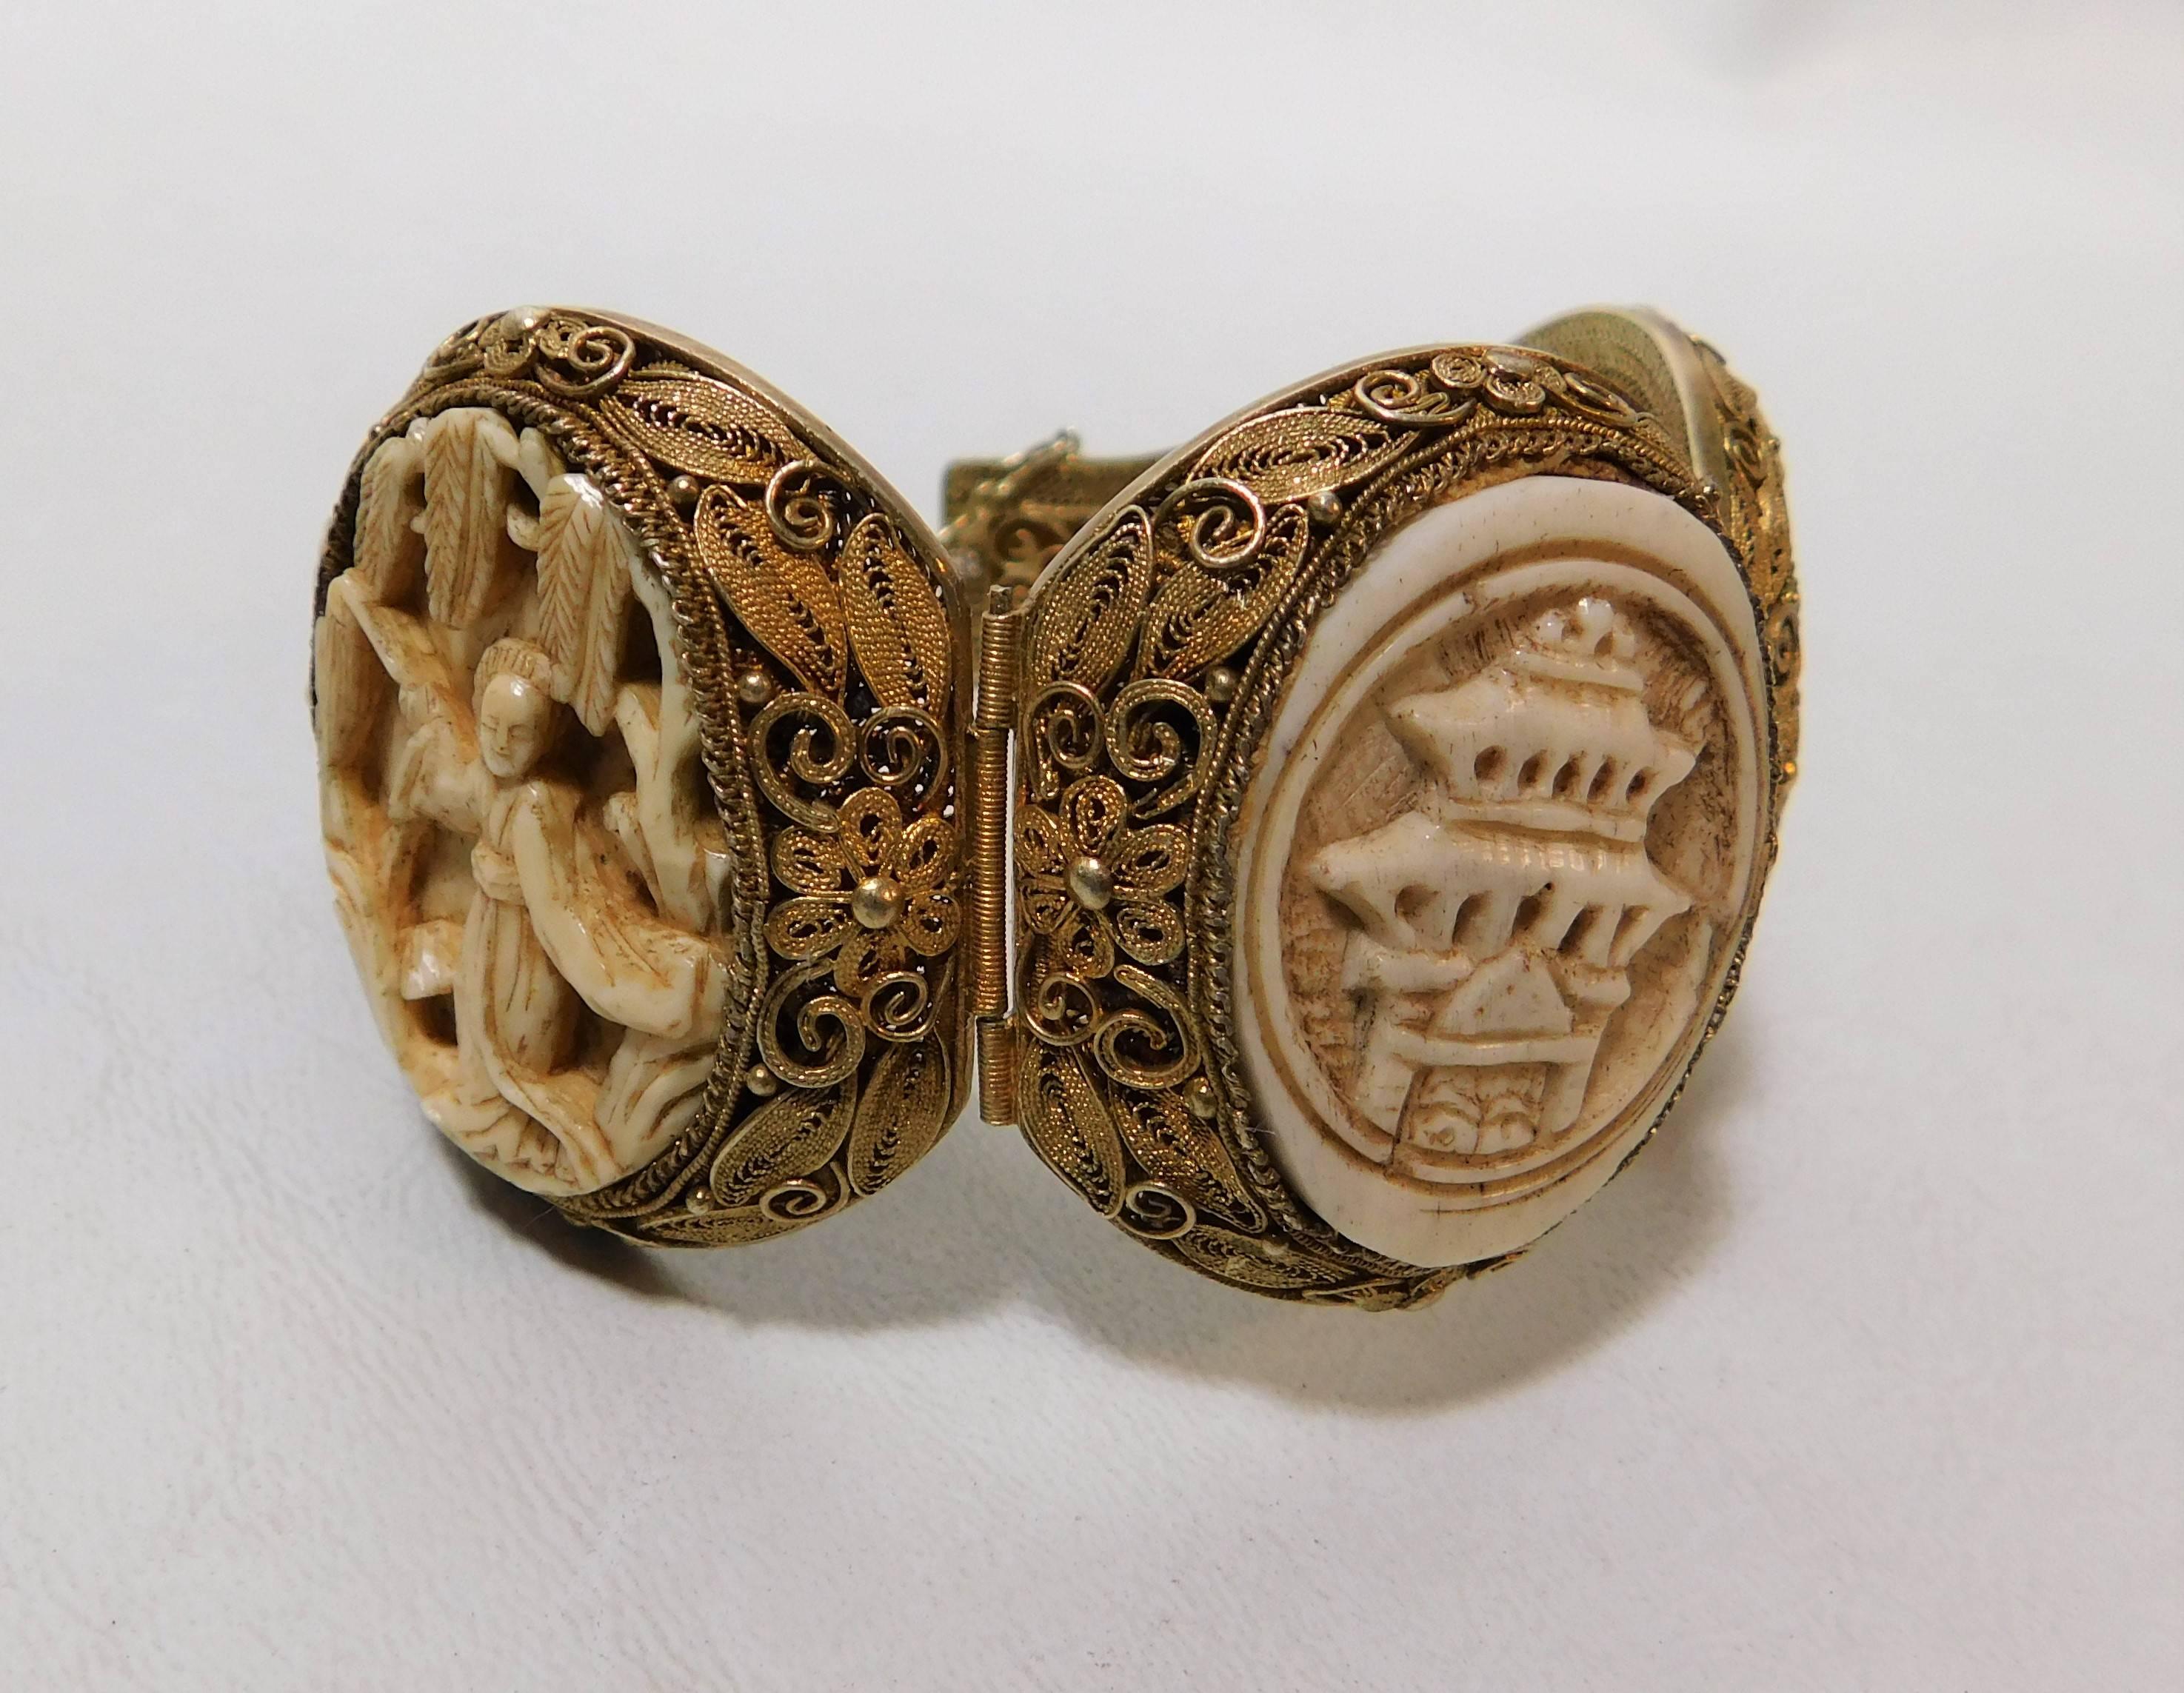 Early 20th century Chinese silver with gold gilding bone bracelet.